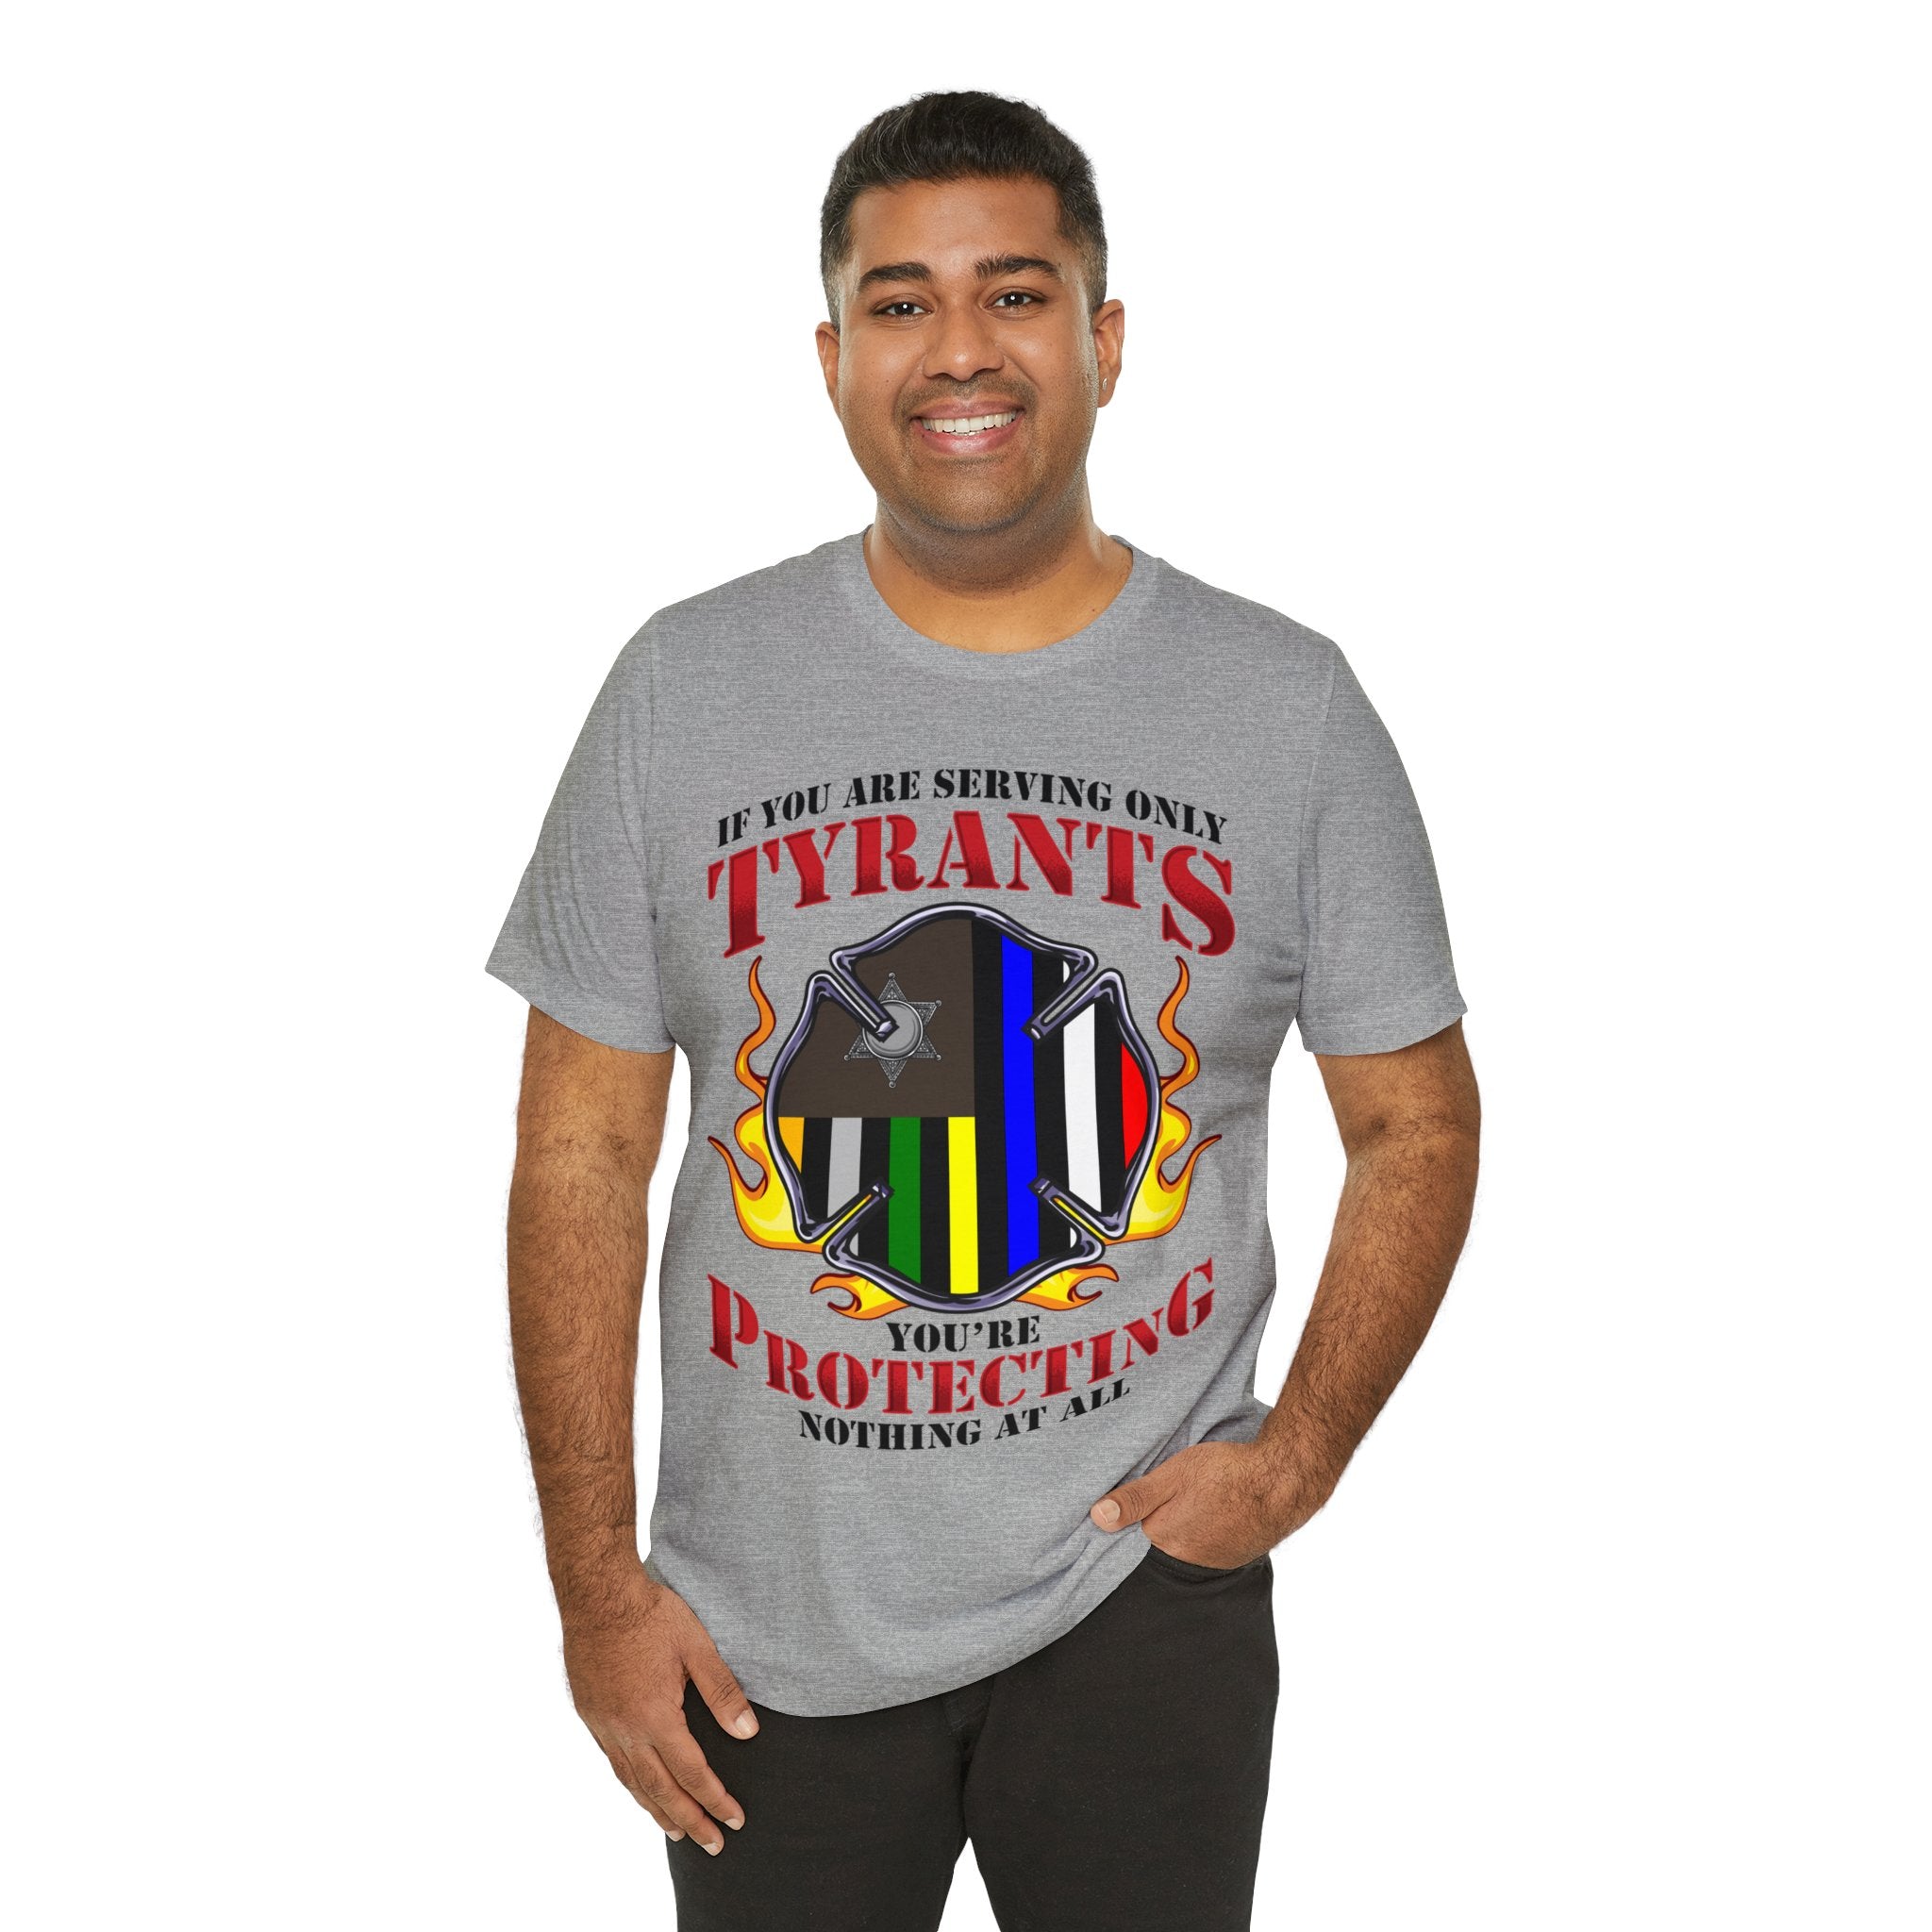 Thin Firefighter Line Tee - Tyrants/Protecting